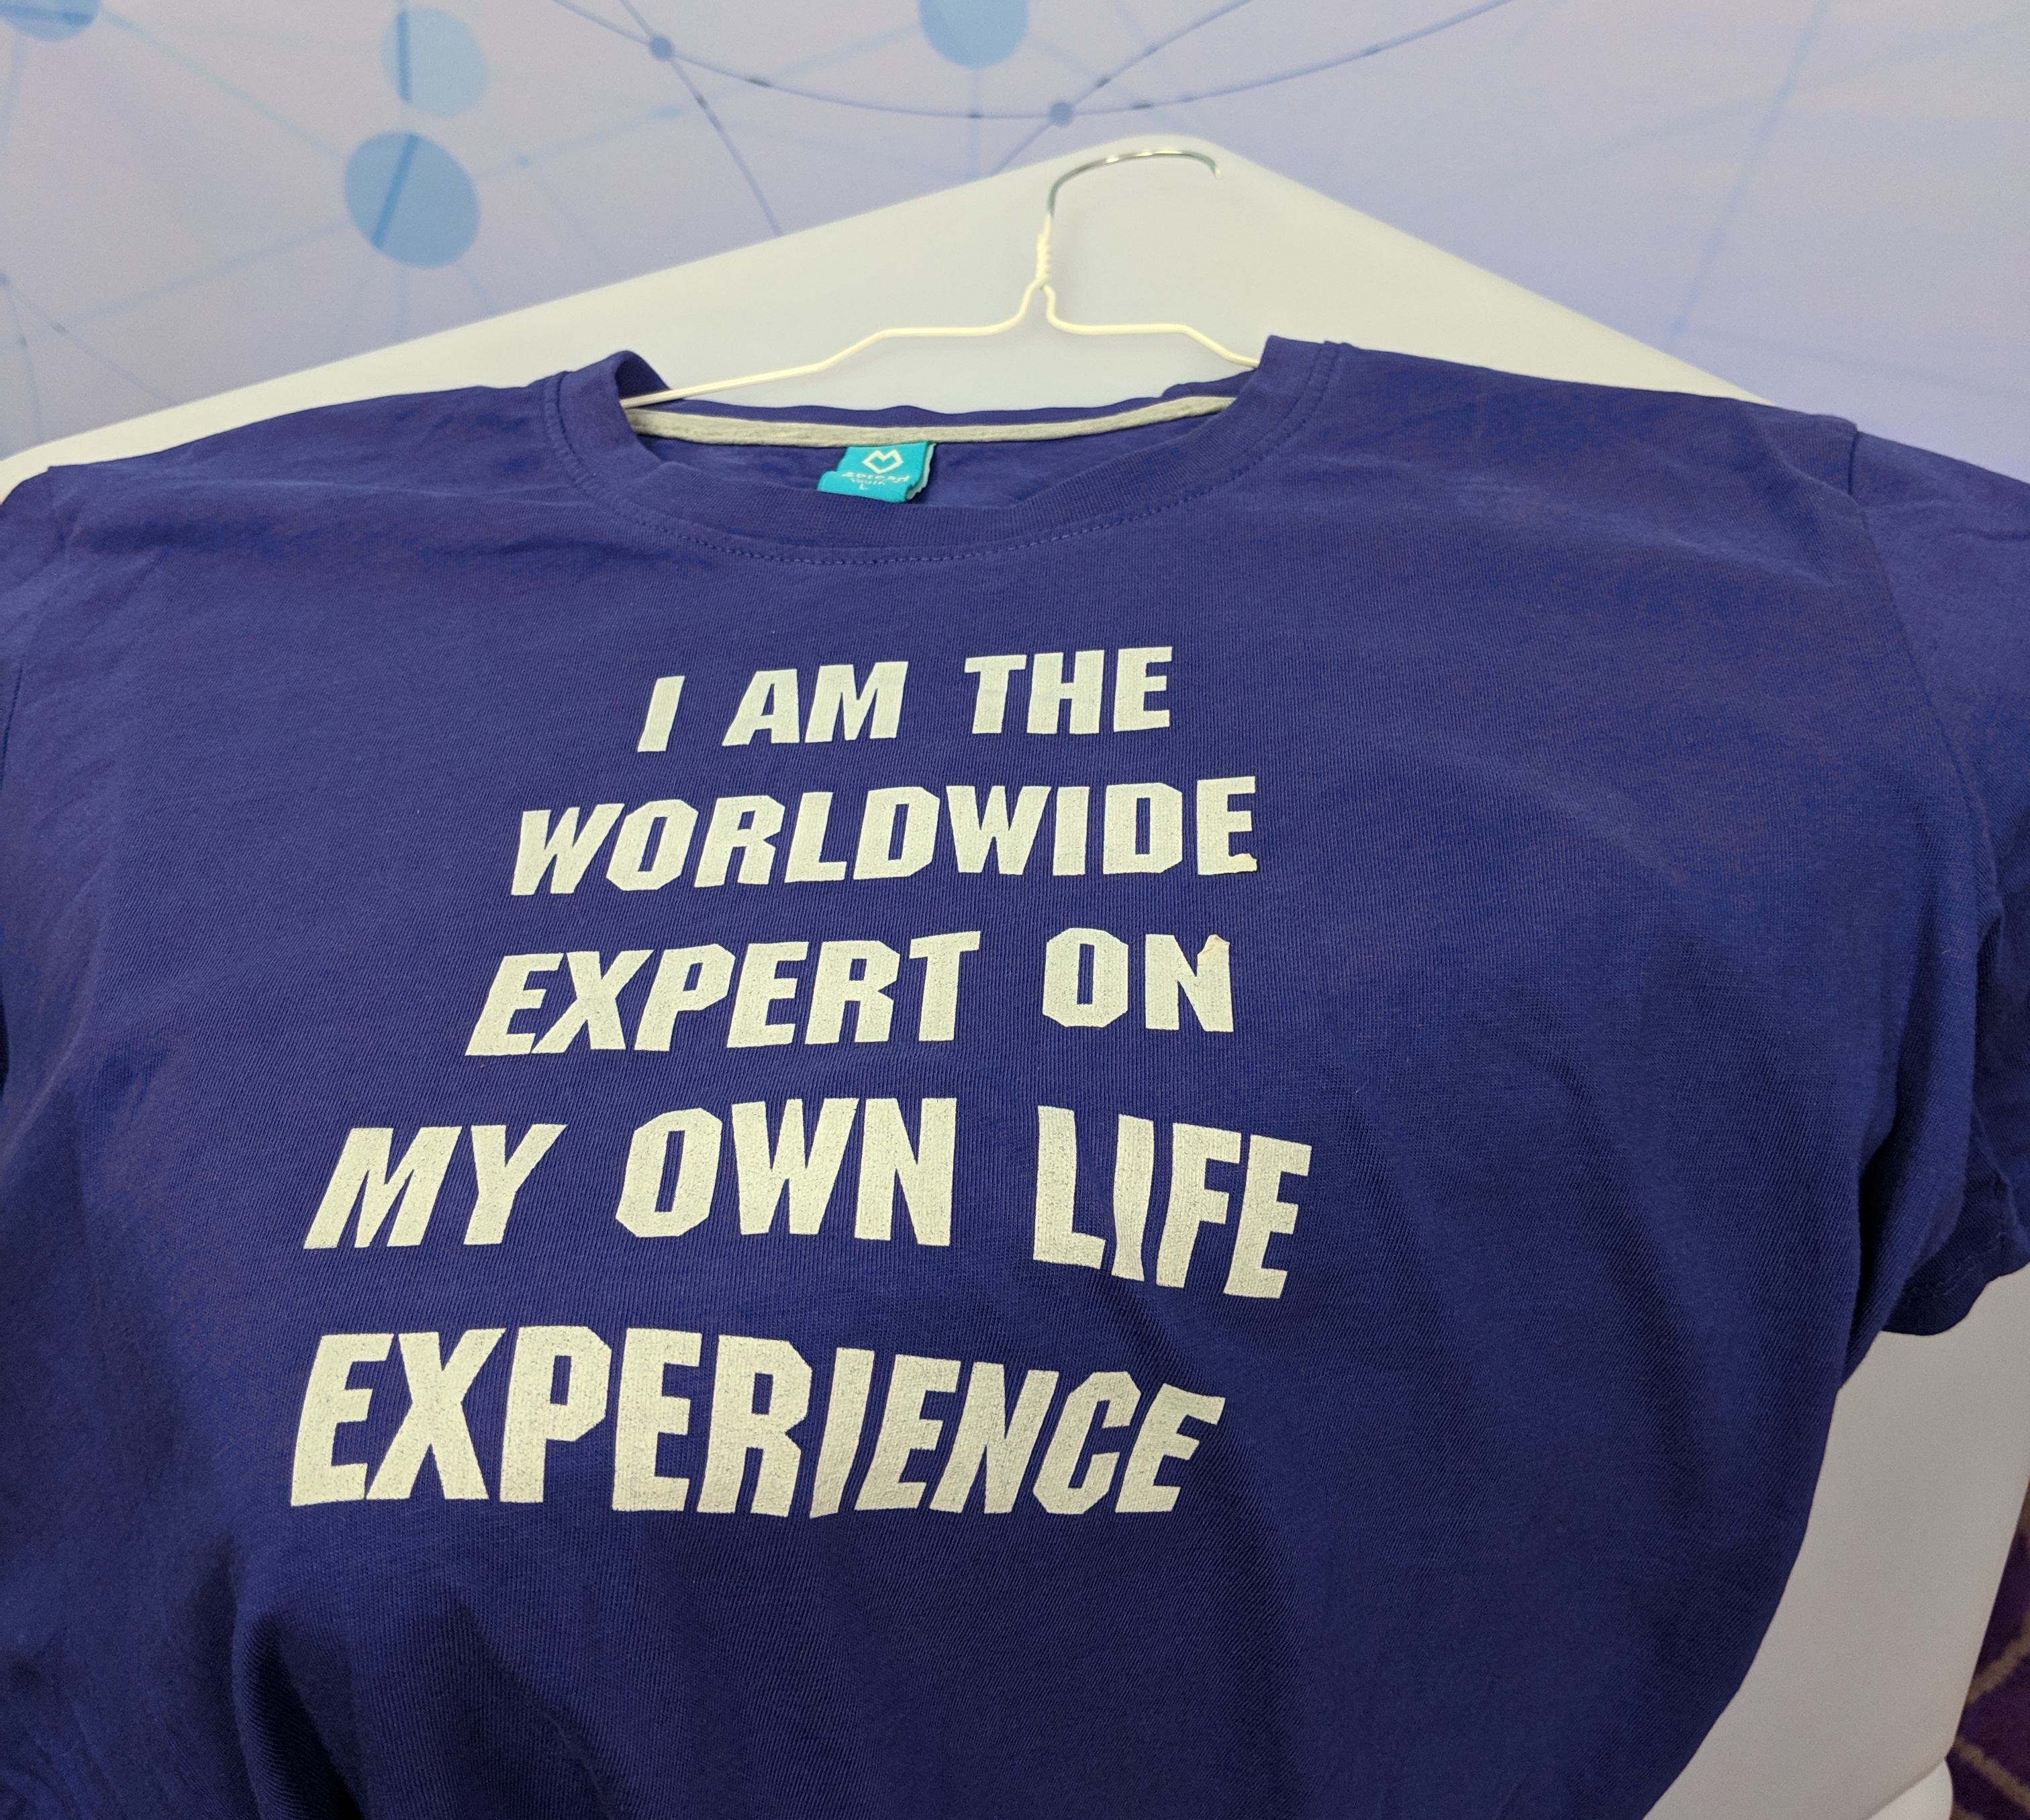 Foto mit Aufschrift "I am the worldwide expert on my own life experience"